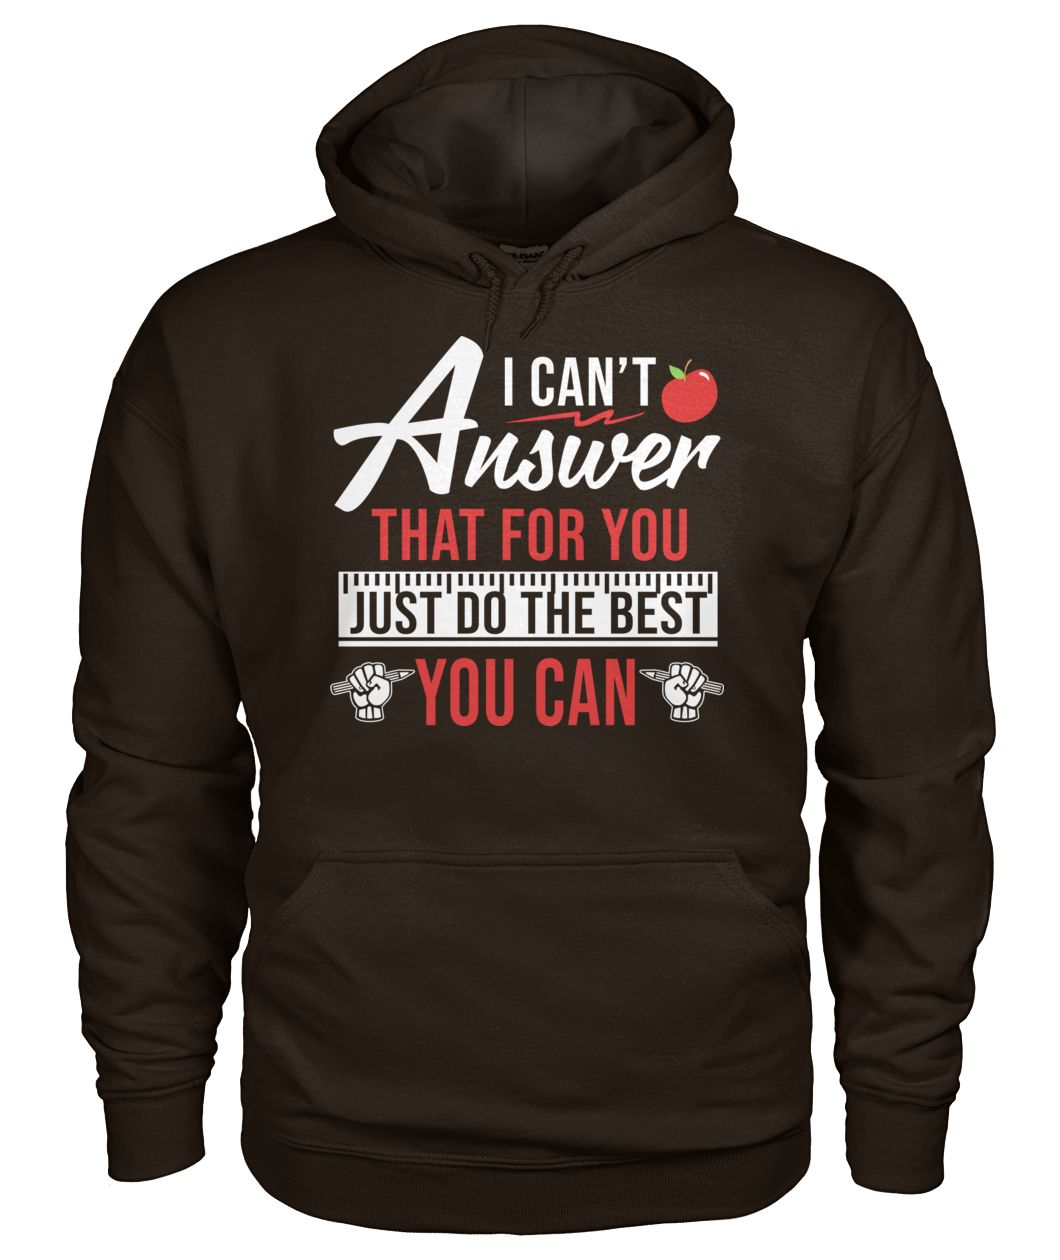 I can't answer that for you just do the best you can gildan hoodie